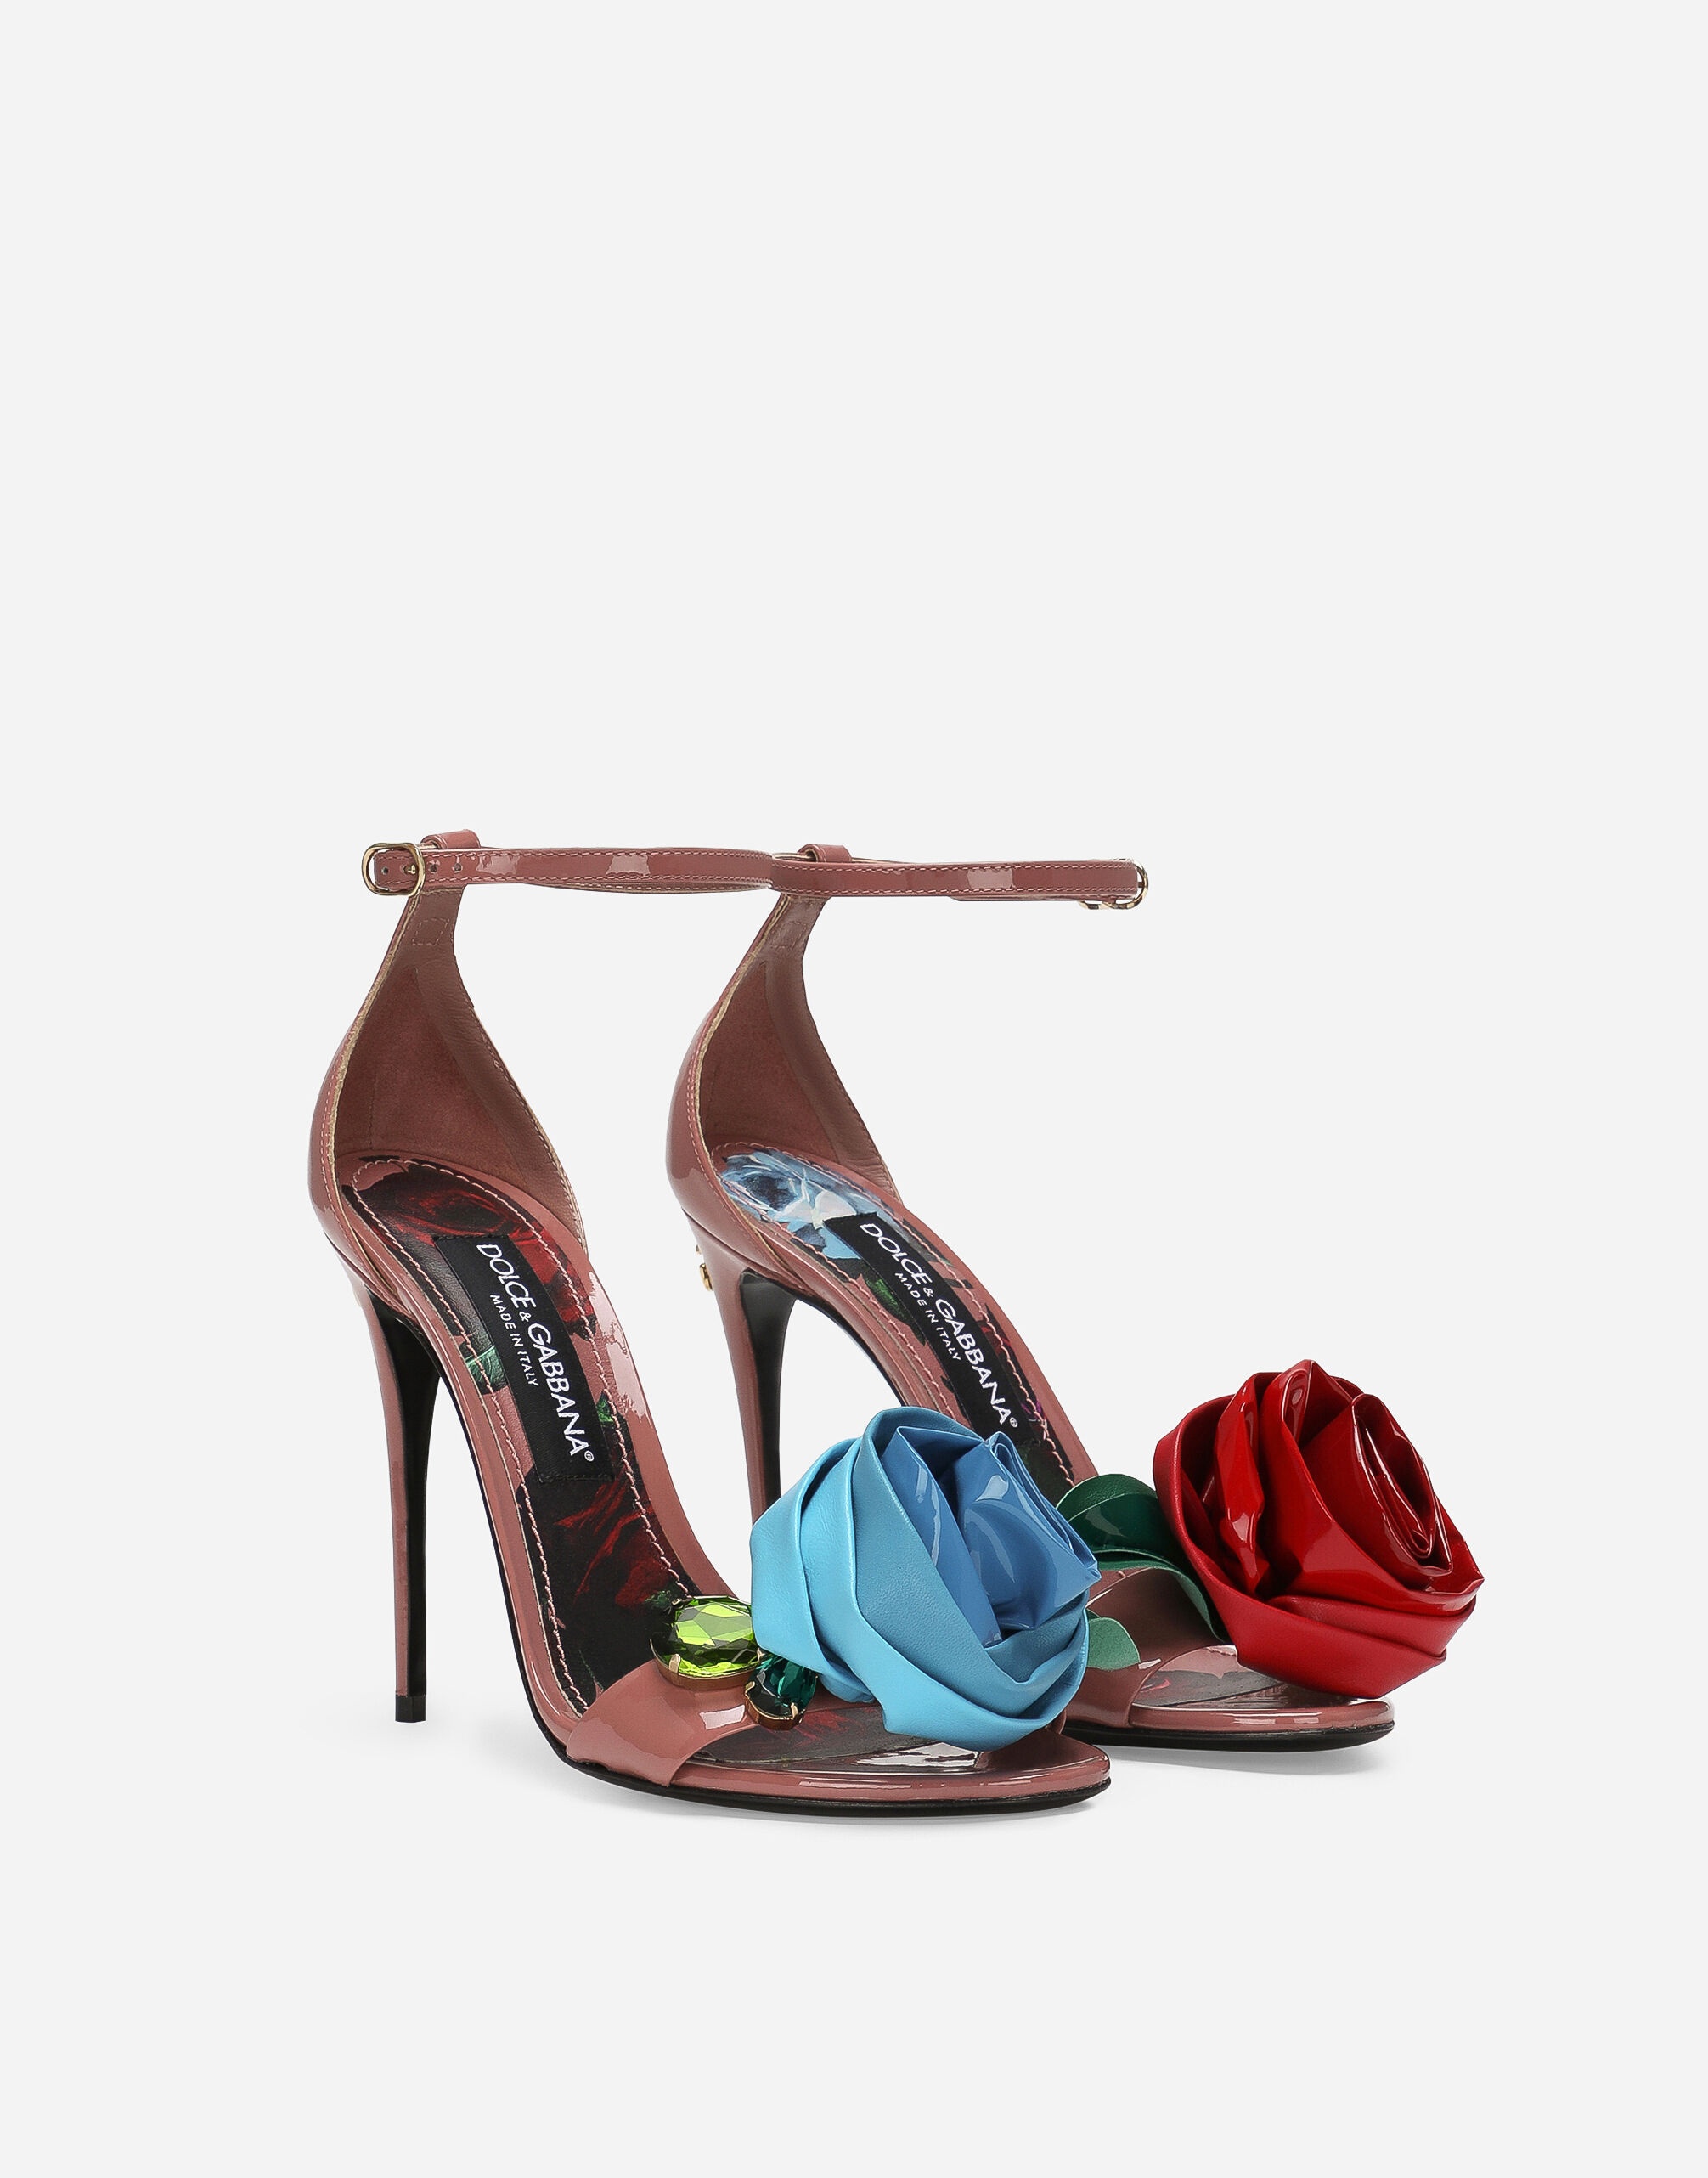 Patent leather sandals - 2